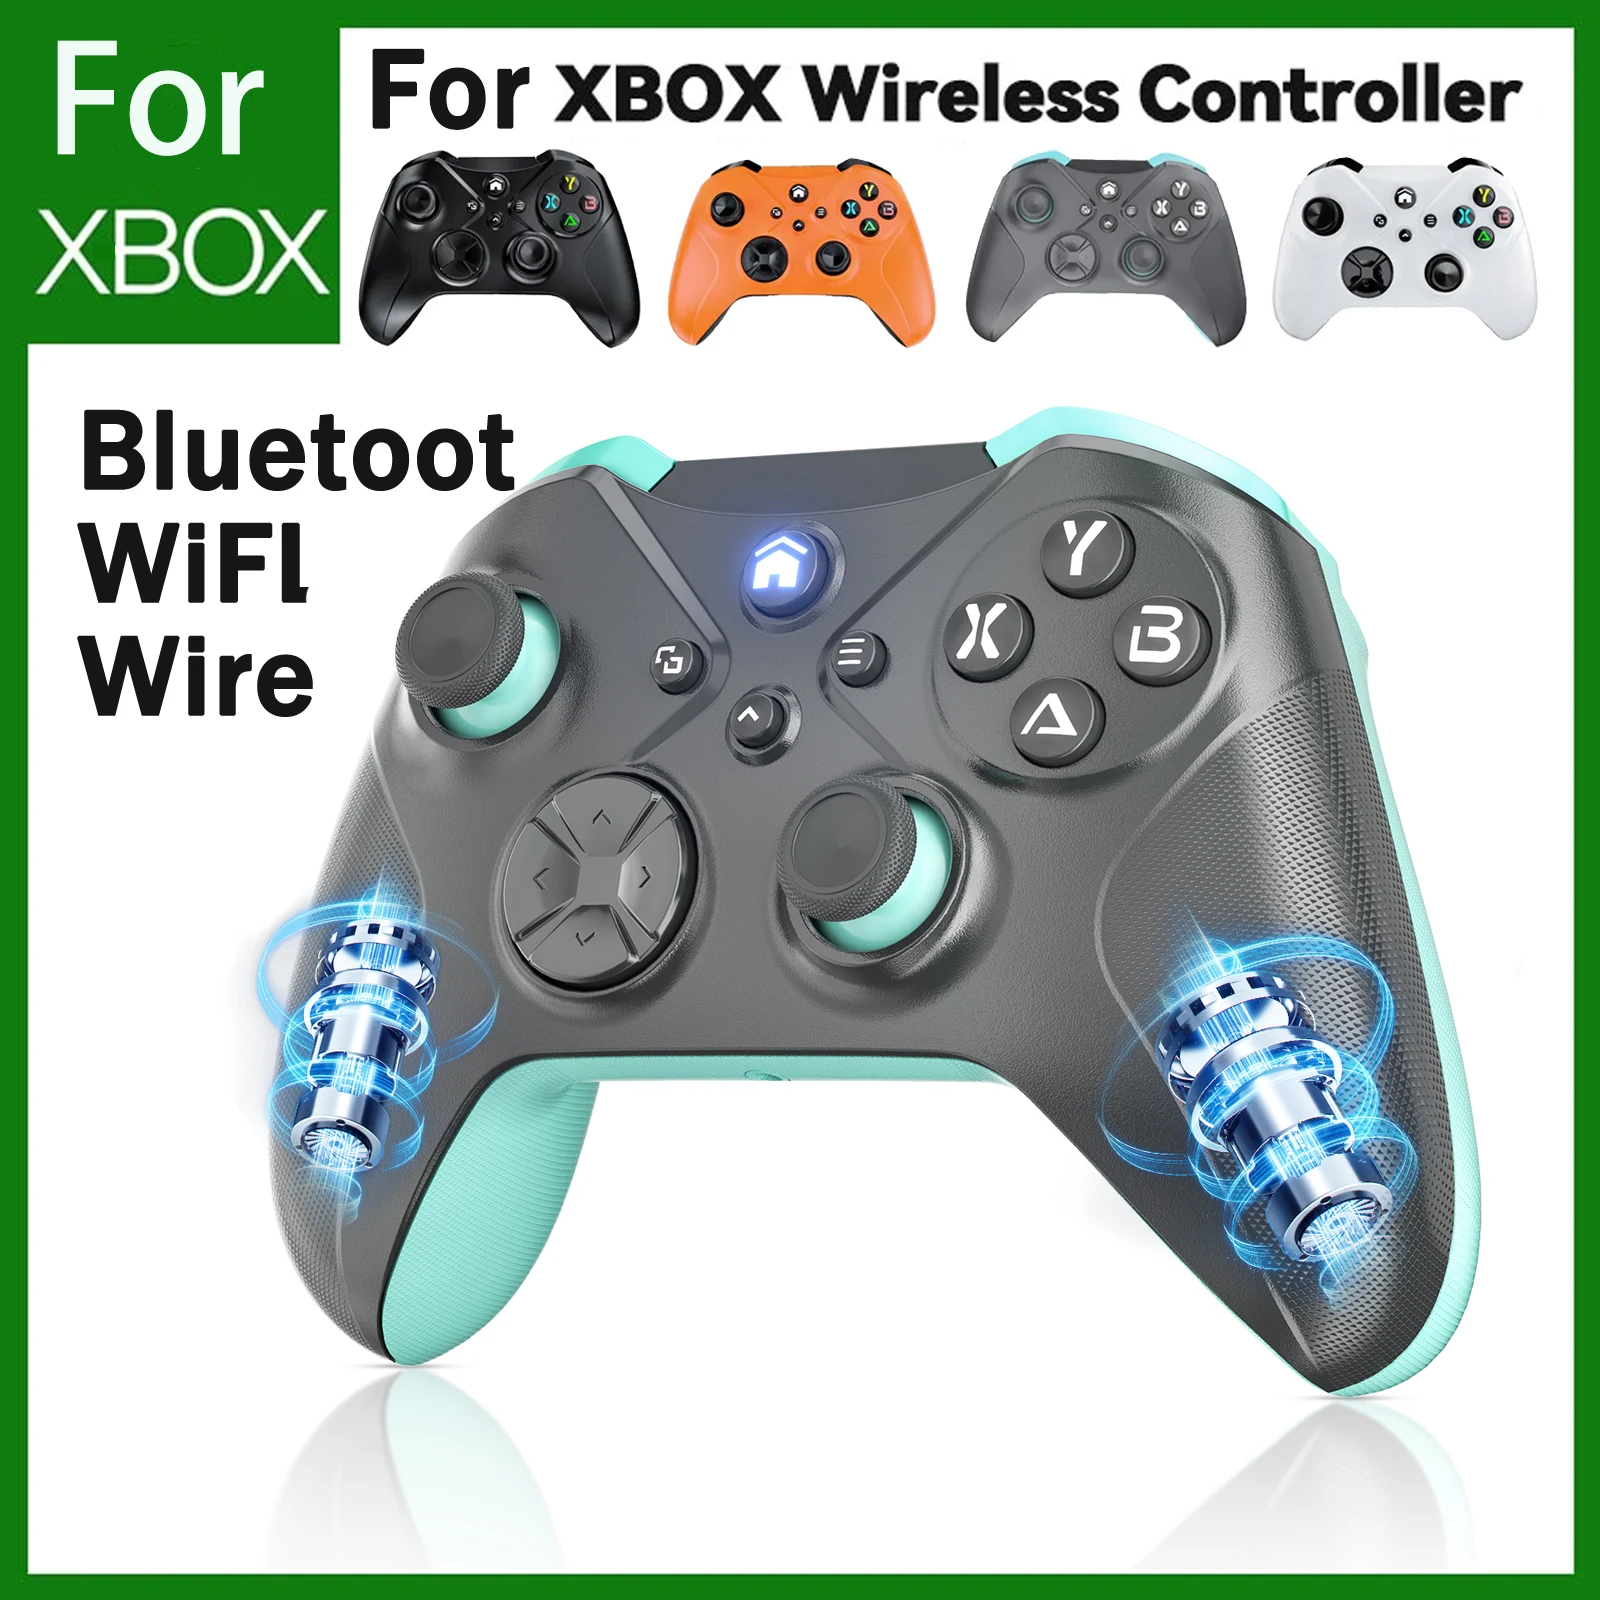 

Wireless gamepad For Microsoft Xbox one controller for Xbox All Series X S Game Consoles Joystick For Forza Horizon 5